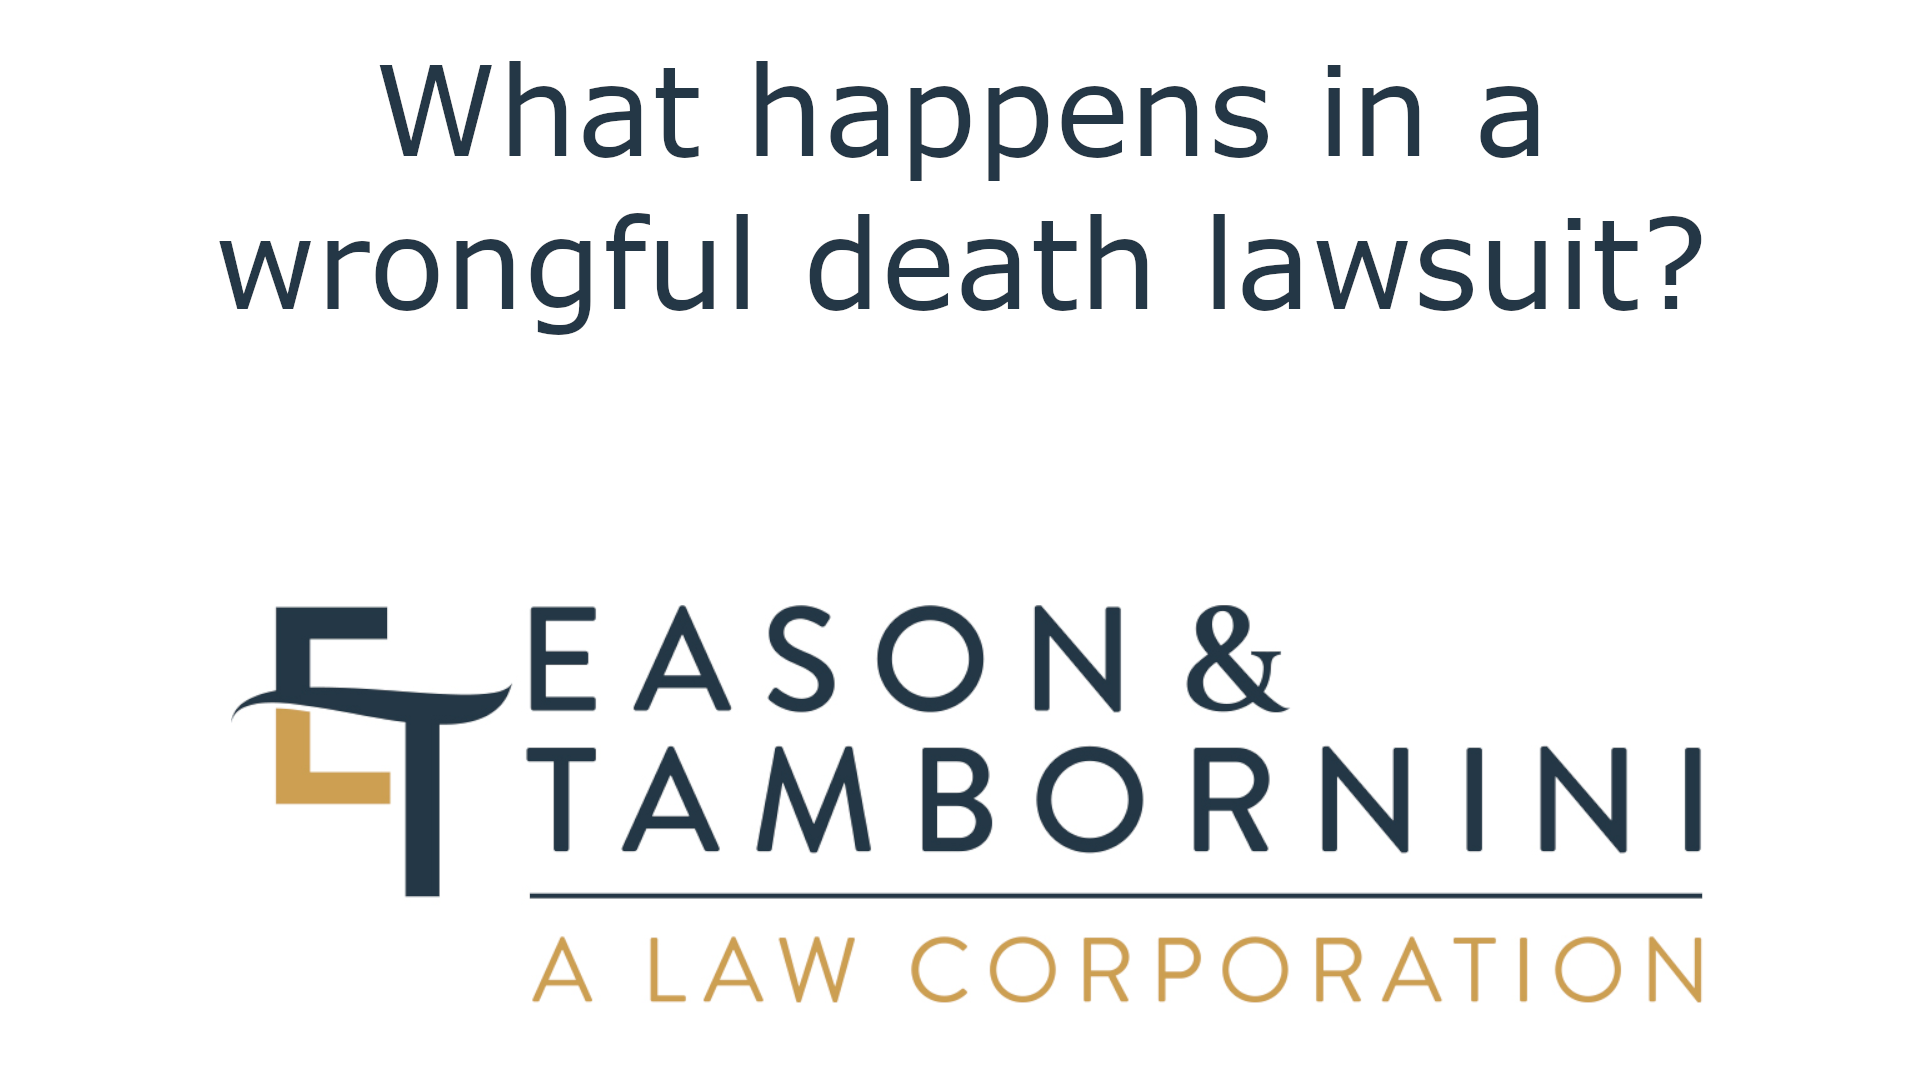 What happens in a wrongful death lawsuit?